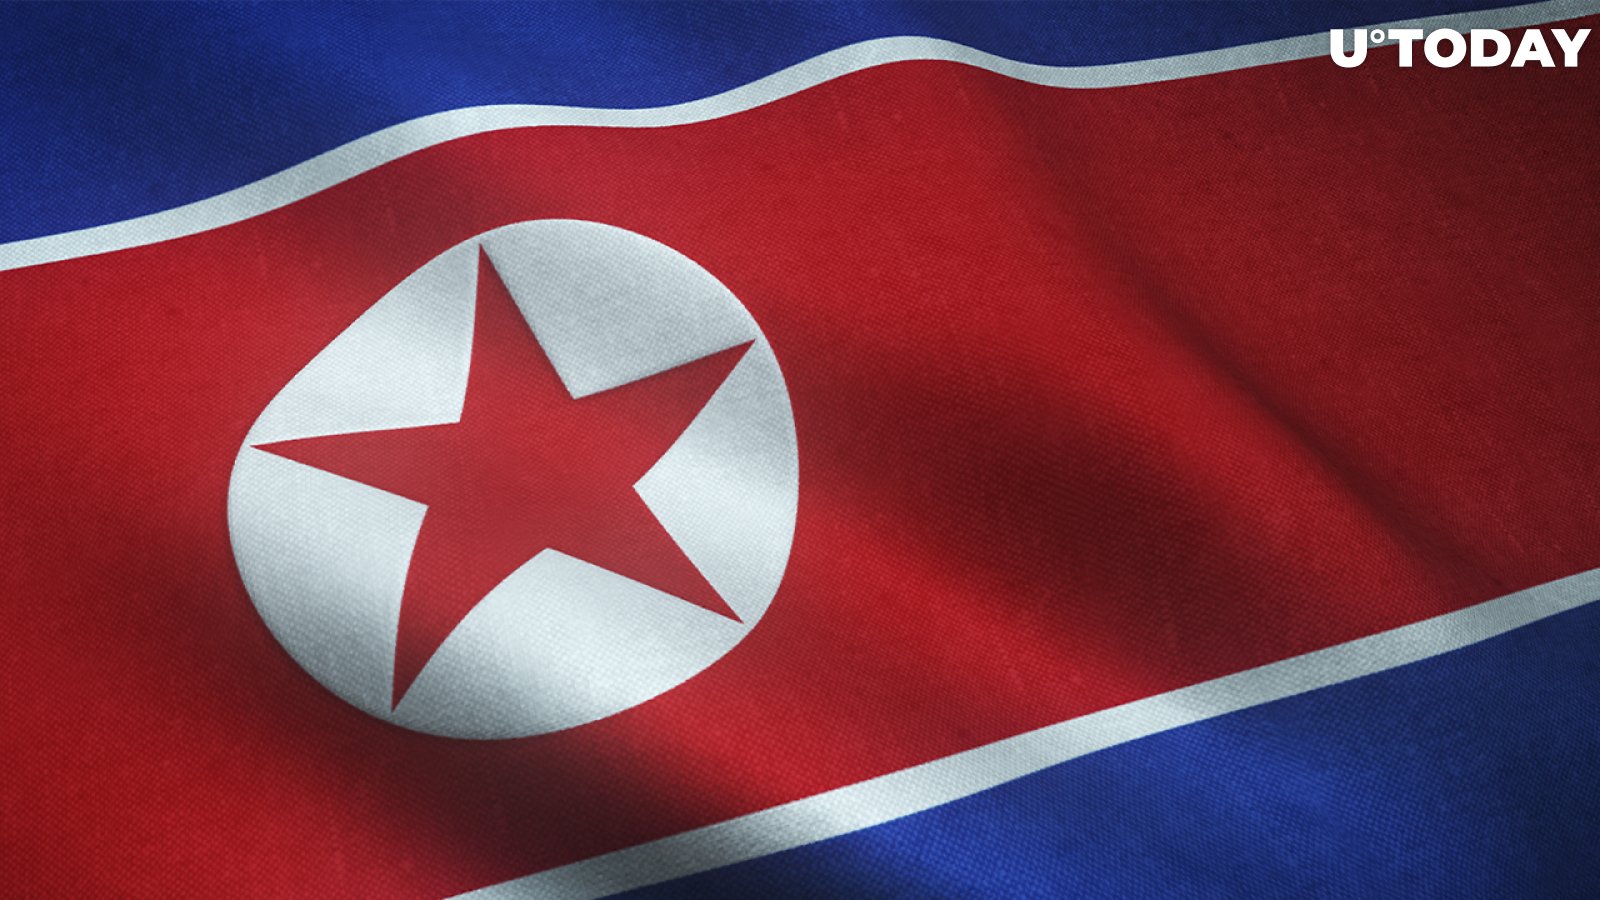 DeFi Protocol Subjected to Cyberattack by North Korea, Co-Founder Says   